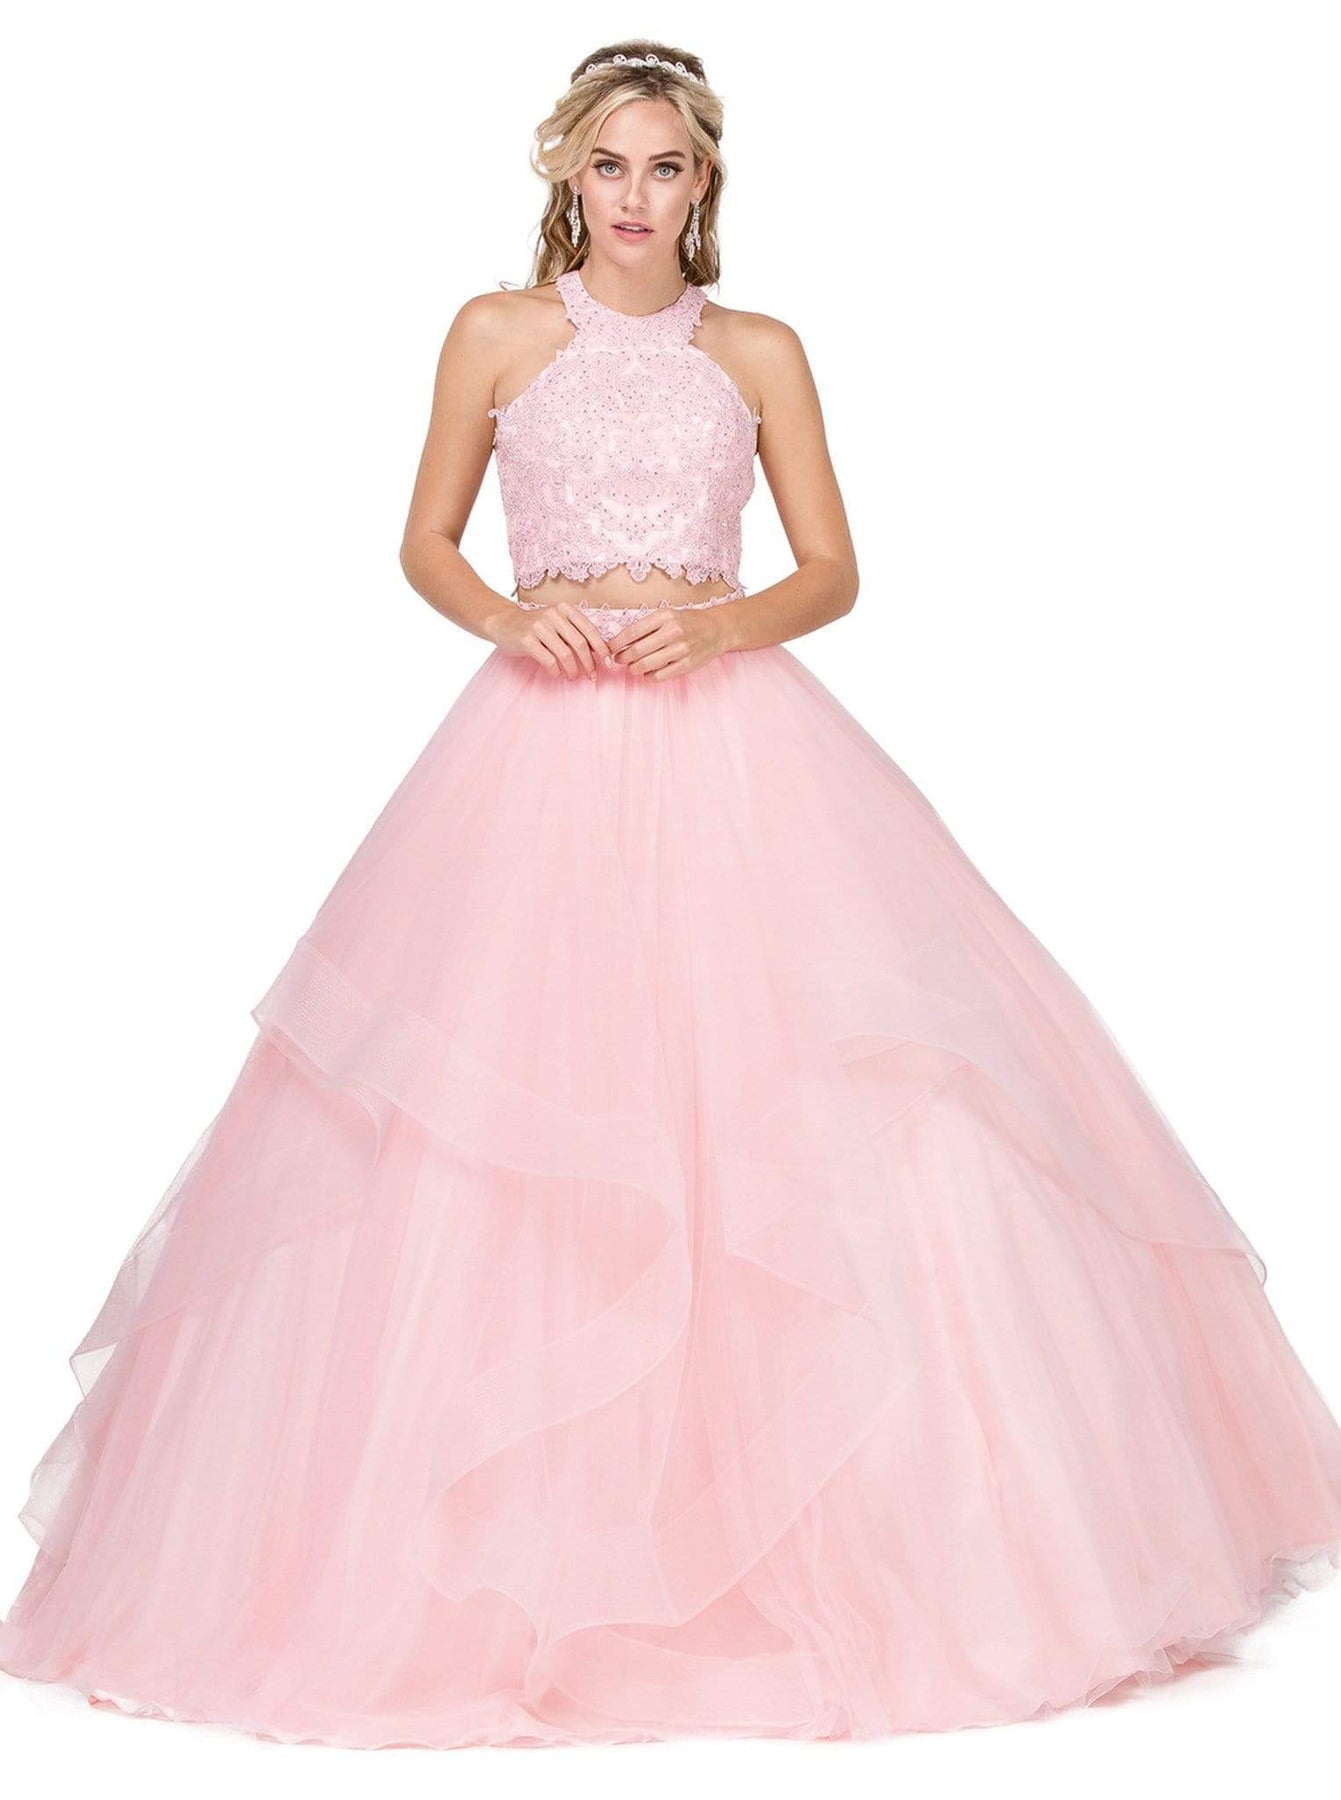 Dancing Queen - 1310 Two Piece Beaded Lace Halter Quinceanera Ballgown Special Occasion Dress XS / Blush